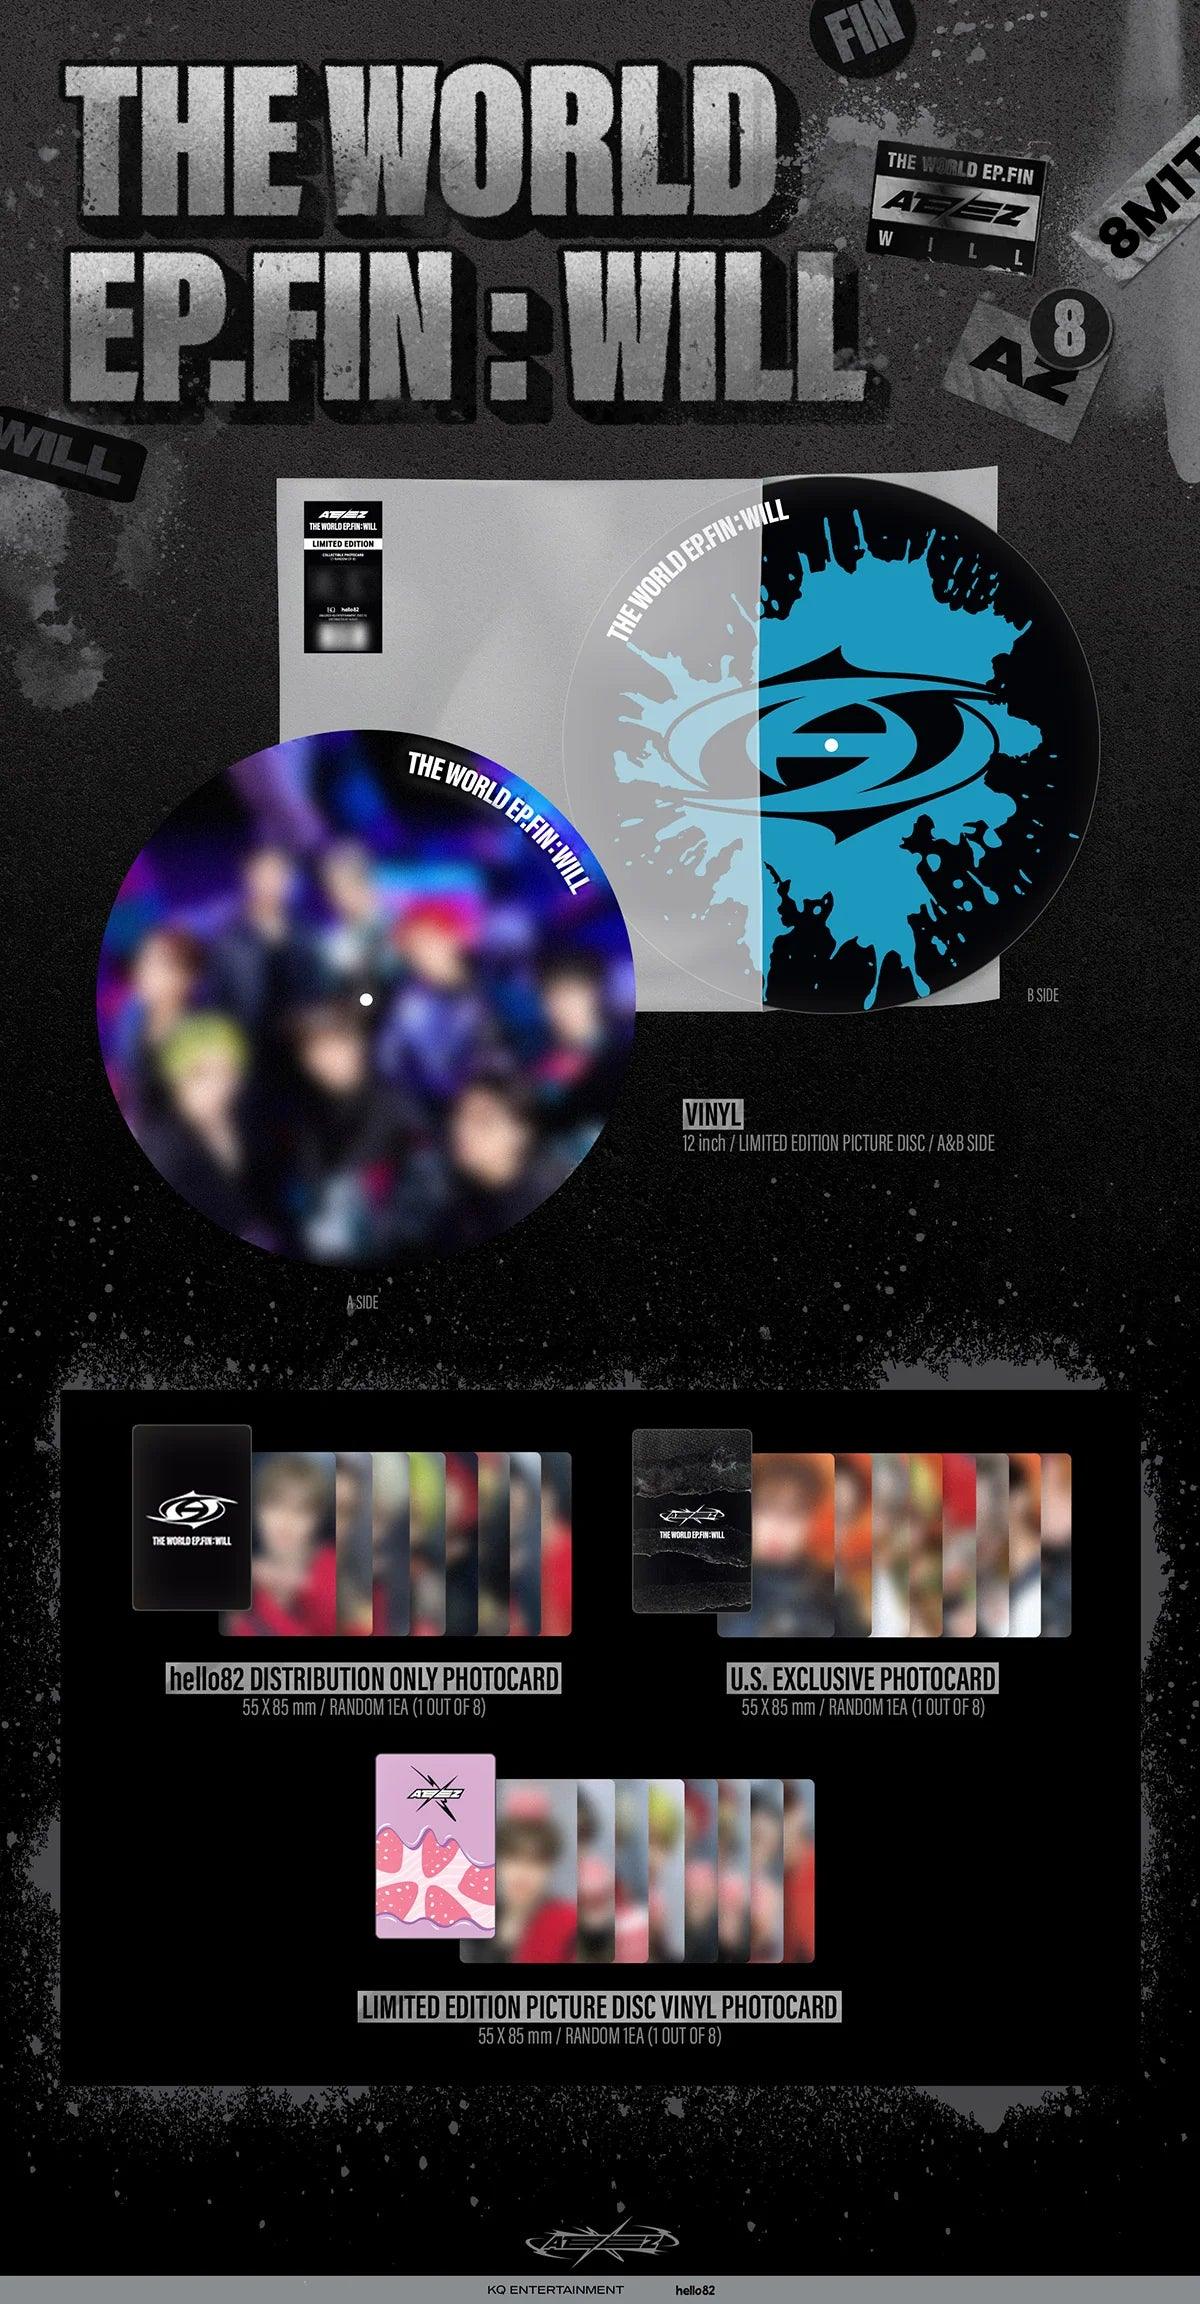 ATEEZ - [THE WORLD EP. FIN : WILL] (Limited Edition Picture Disc Vinyl) - KAEPJJANG SHOP (캡짱 숍)